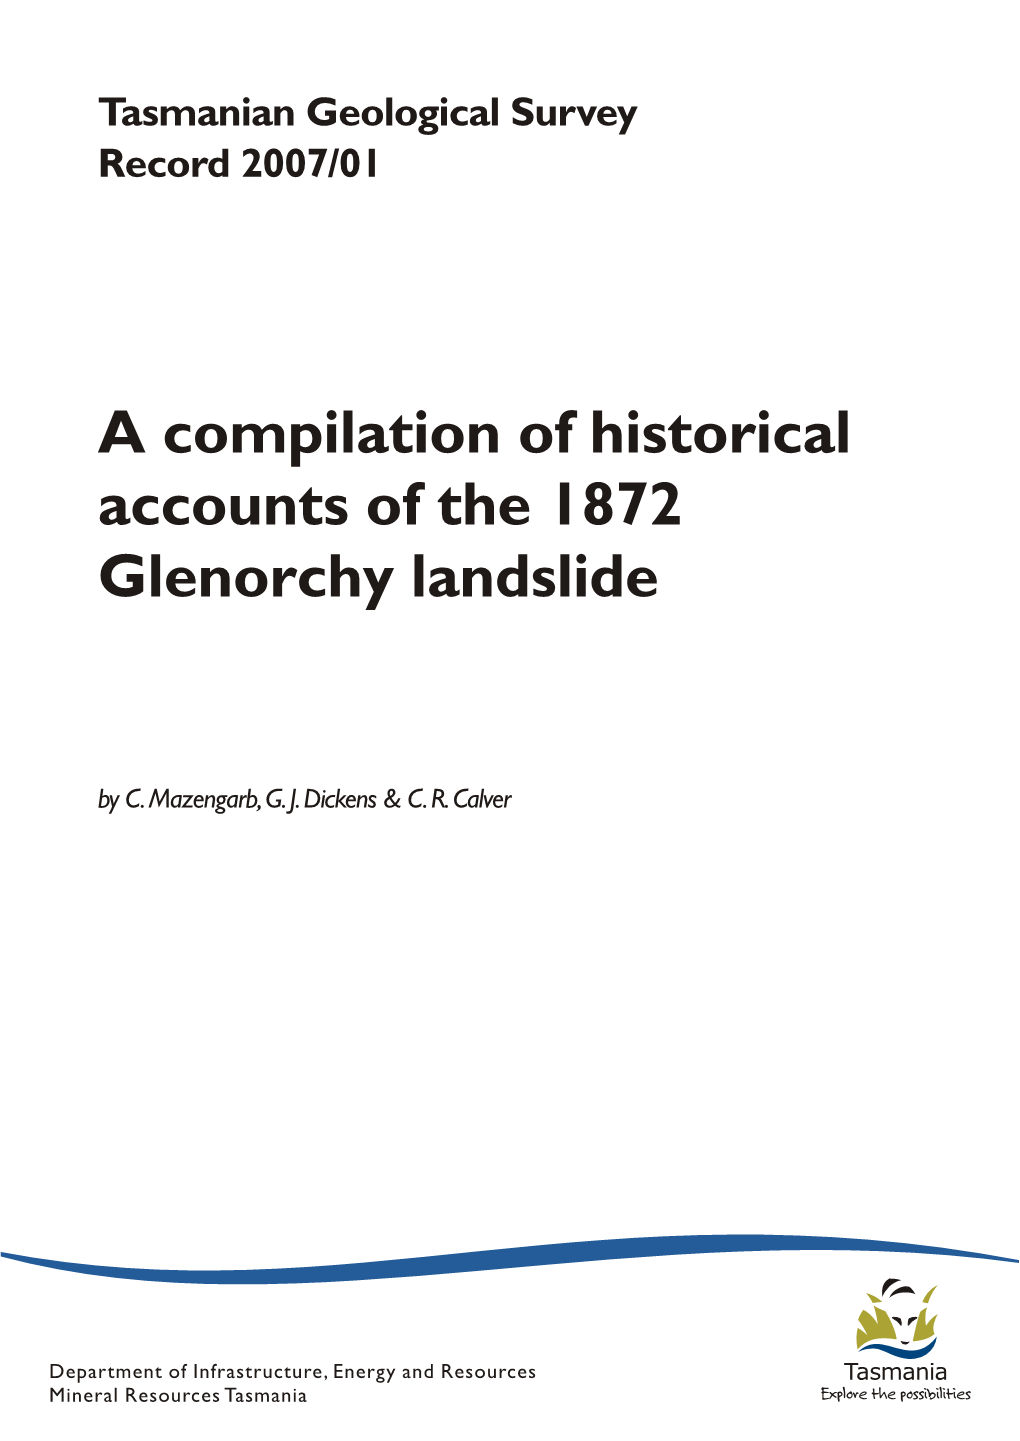 A Compilation of Historical Accounts of the 1872 Glenorchy Landslide